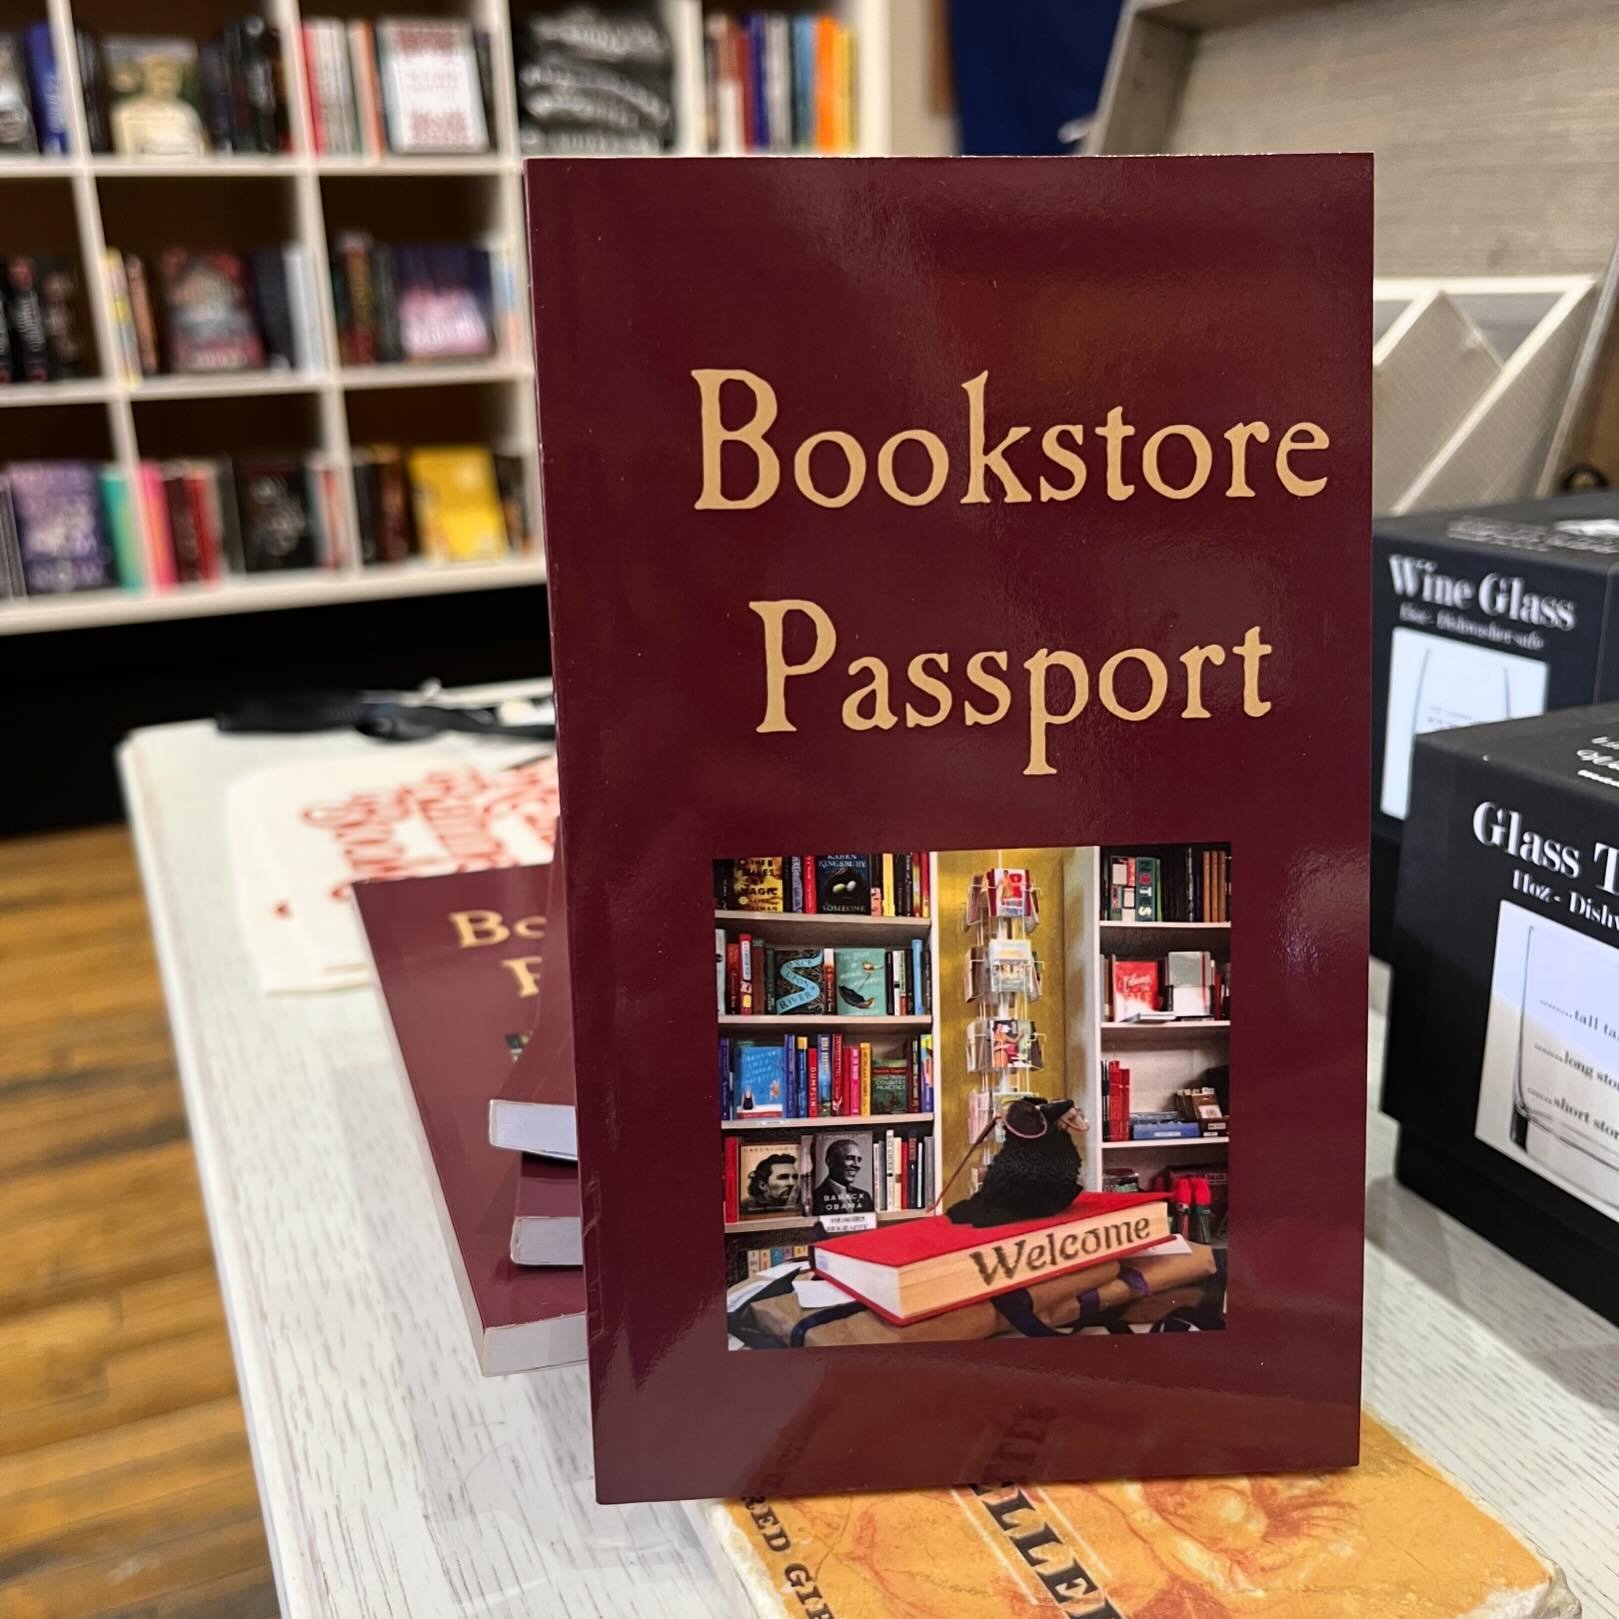 Throughout this week, we will be sharing some of the things that you&rsquo;ll find in the shop this Saturday for Independent Bookstore Day. We are so excited to add these bookstore passports to our inventory! Are you the level of book nerd that loves